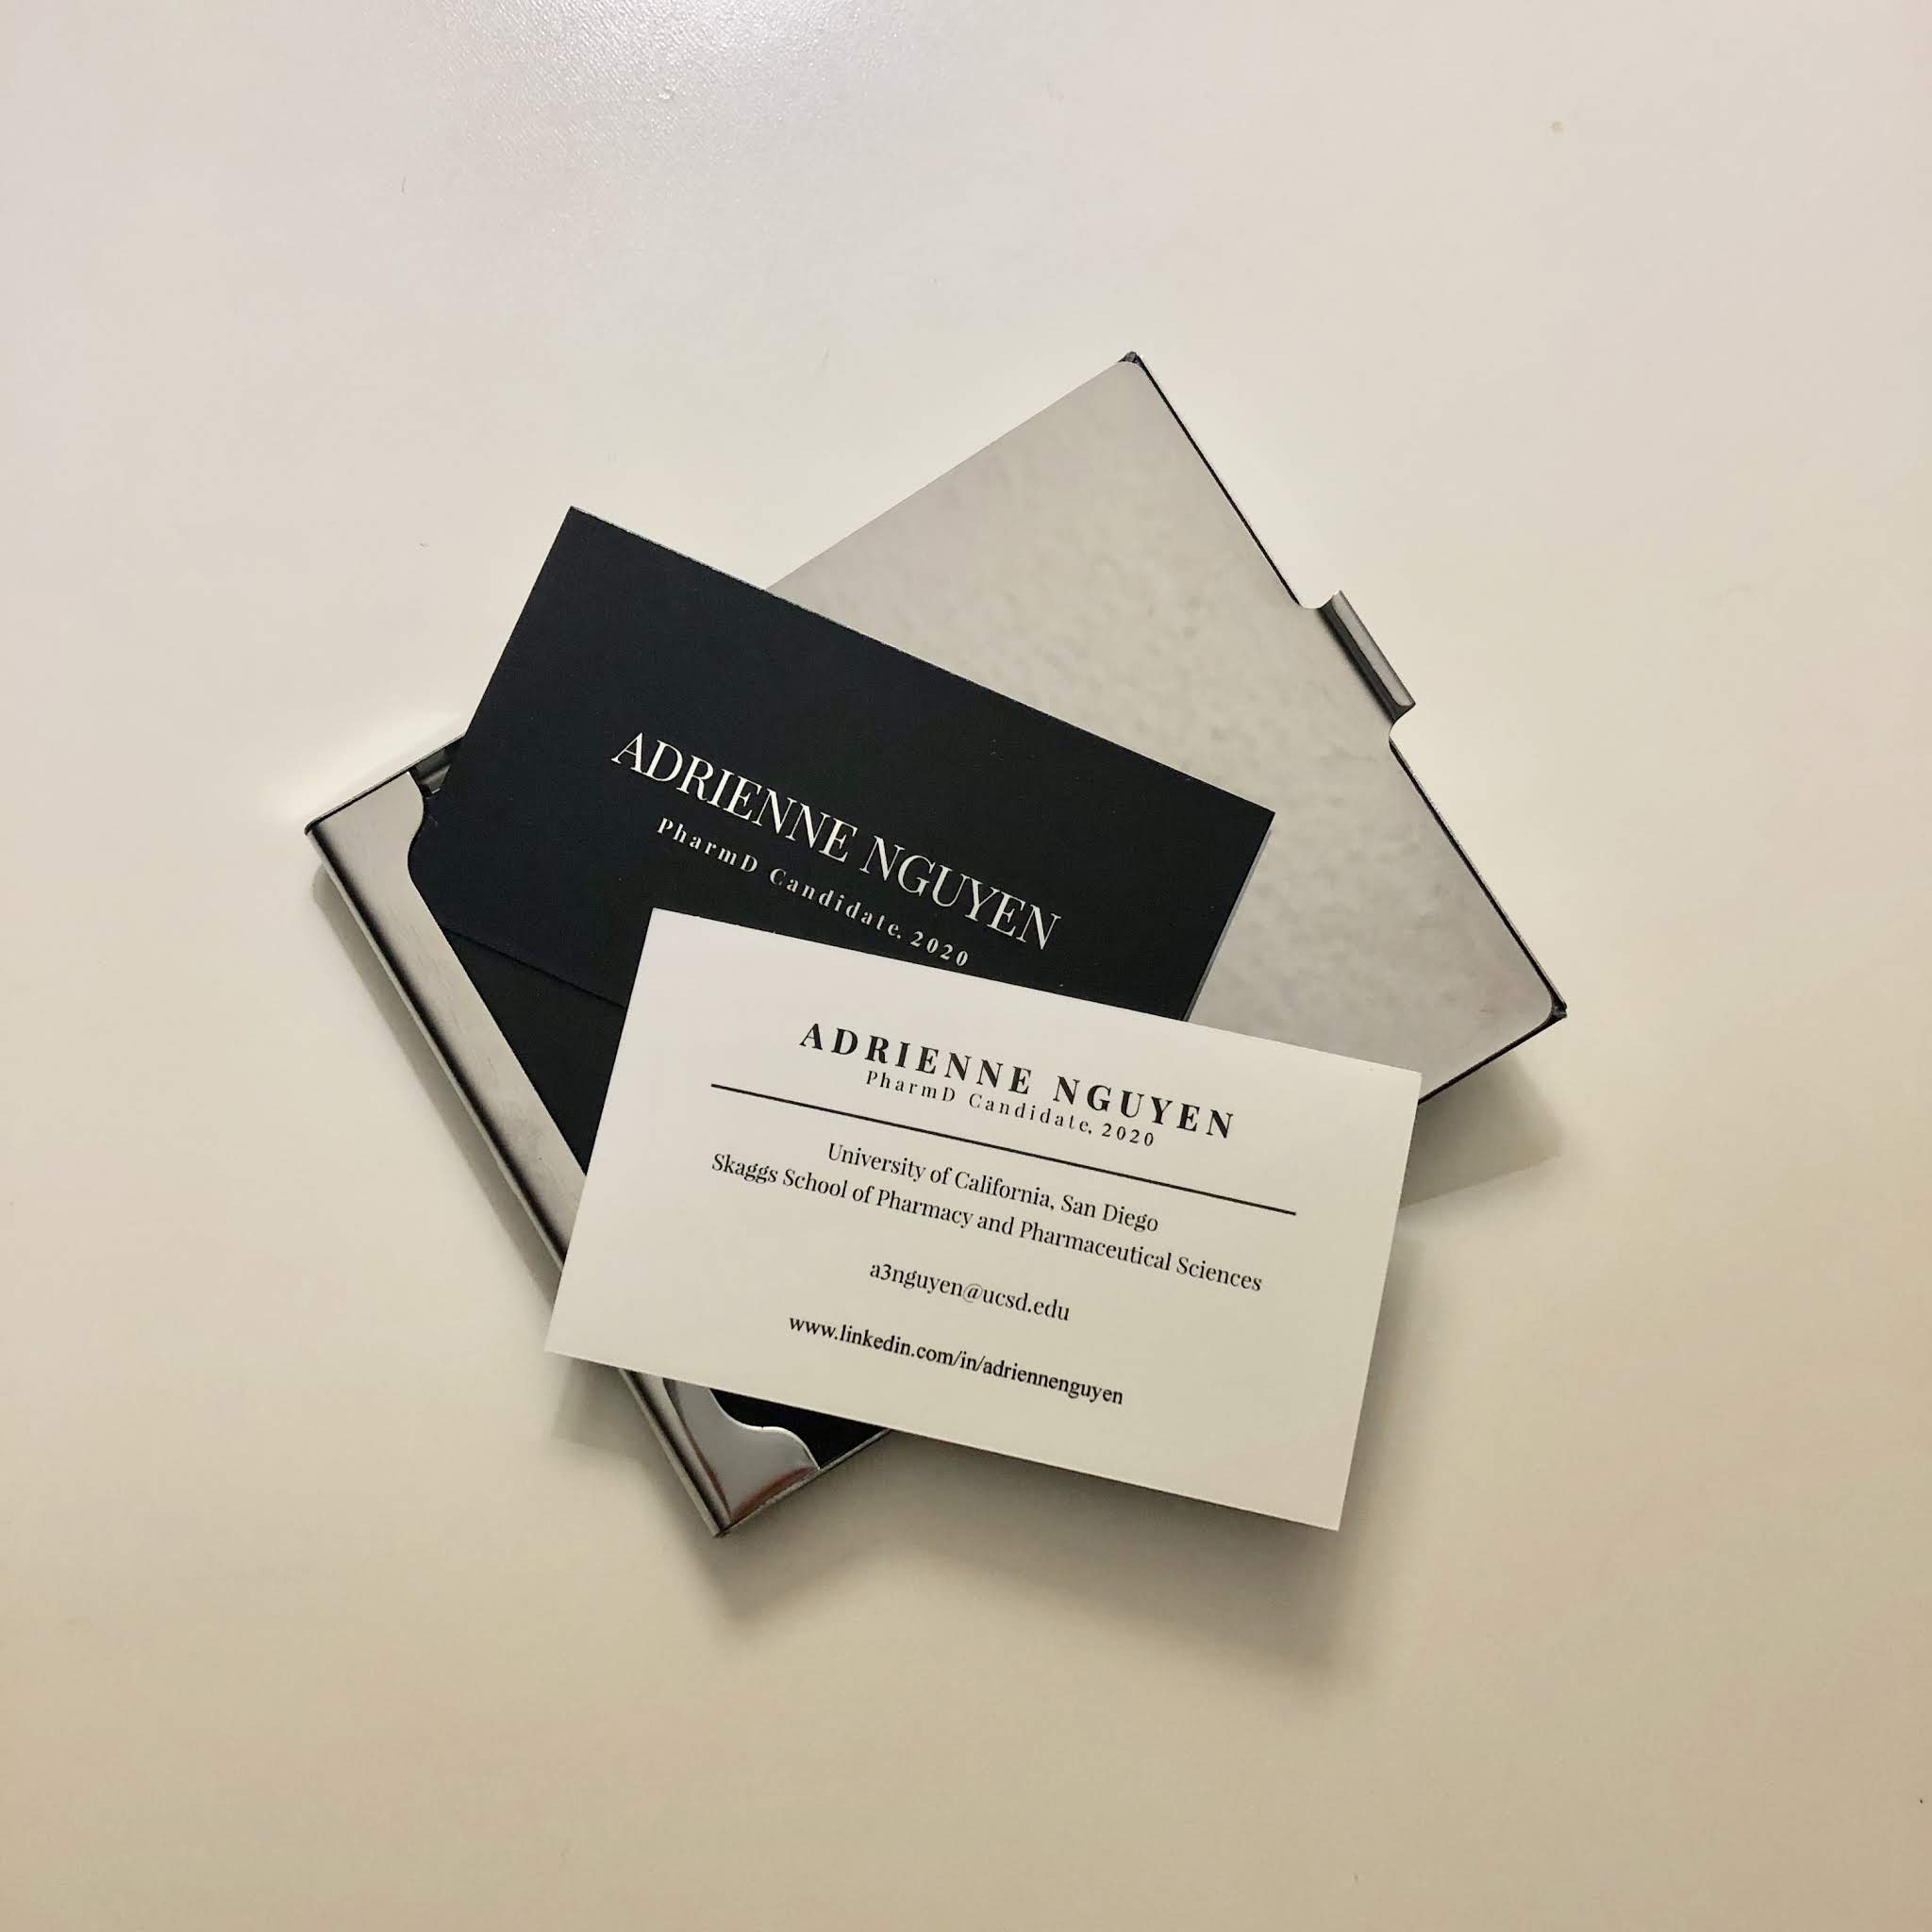 Adrienne Nguyen, PharmD - Pharmacy Blog - Business Cards for ASHP Midyear - Classy Black and White Business Cards